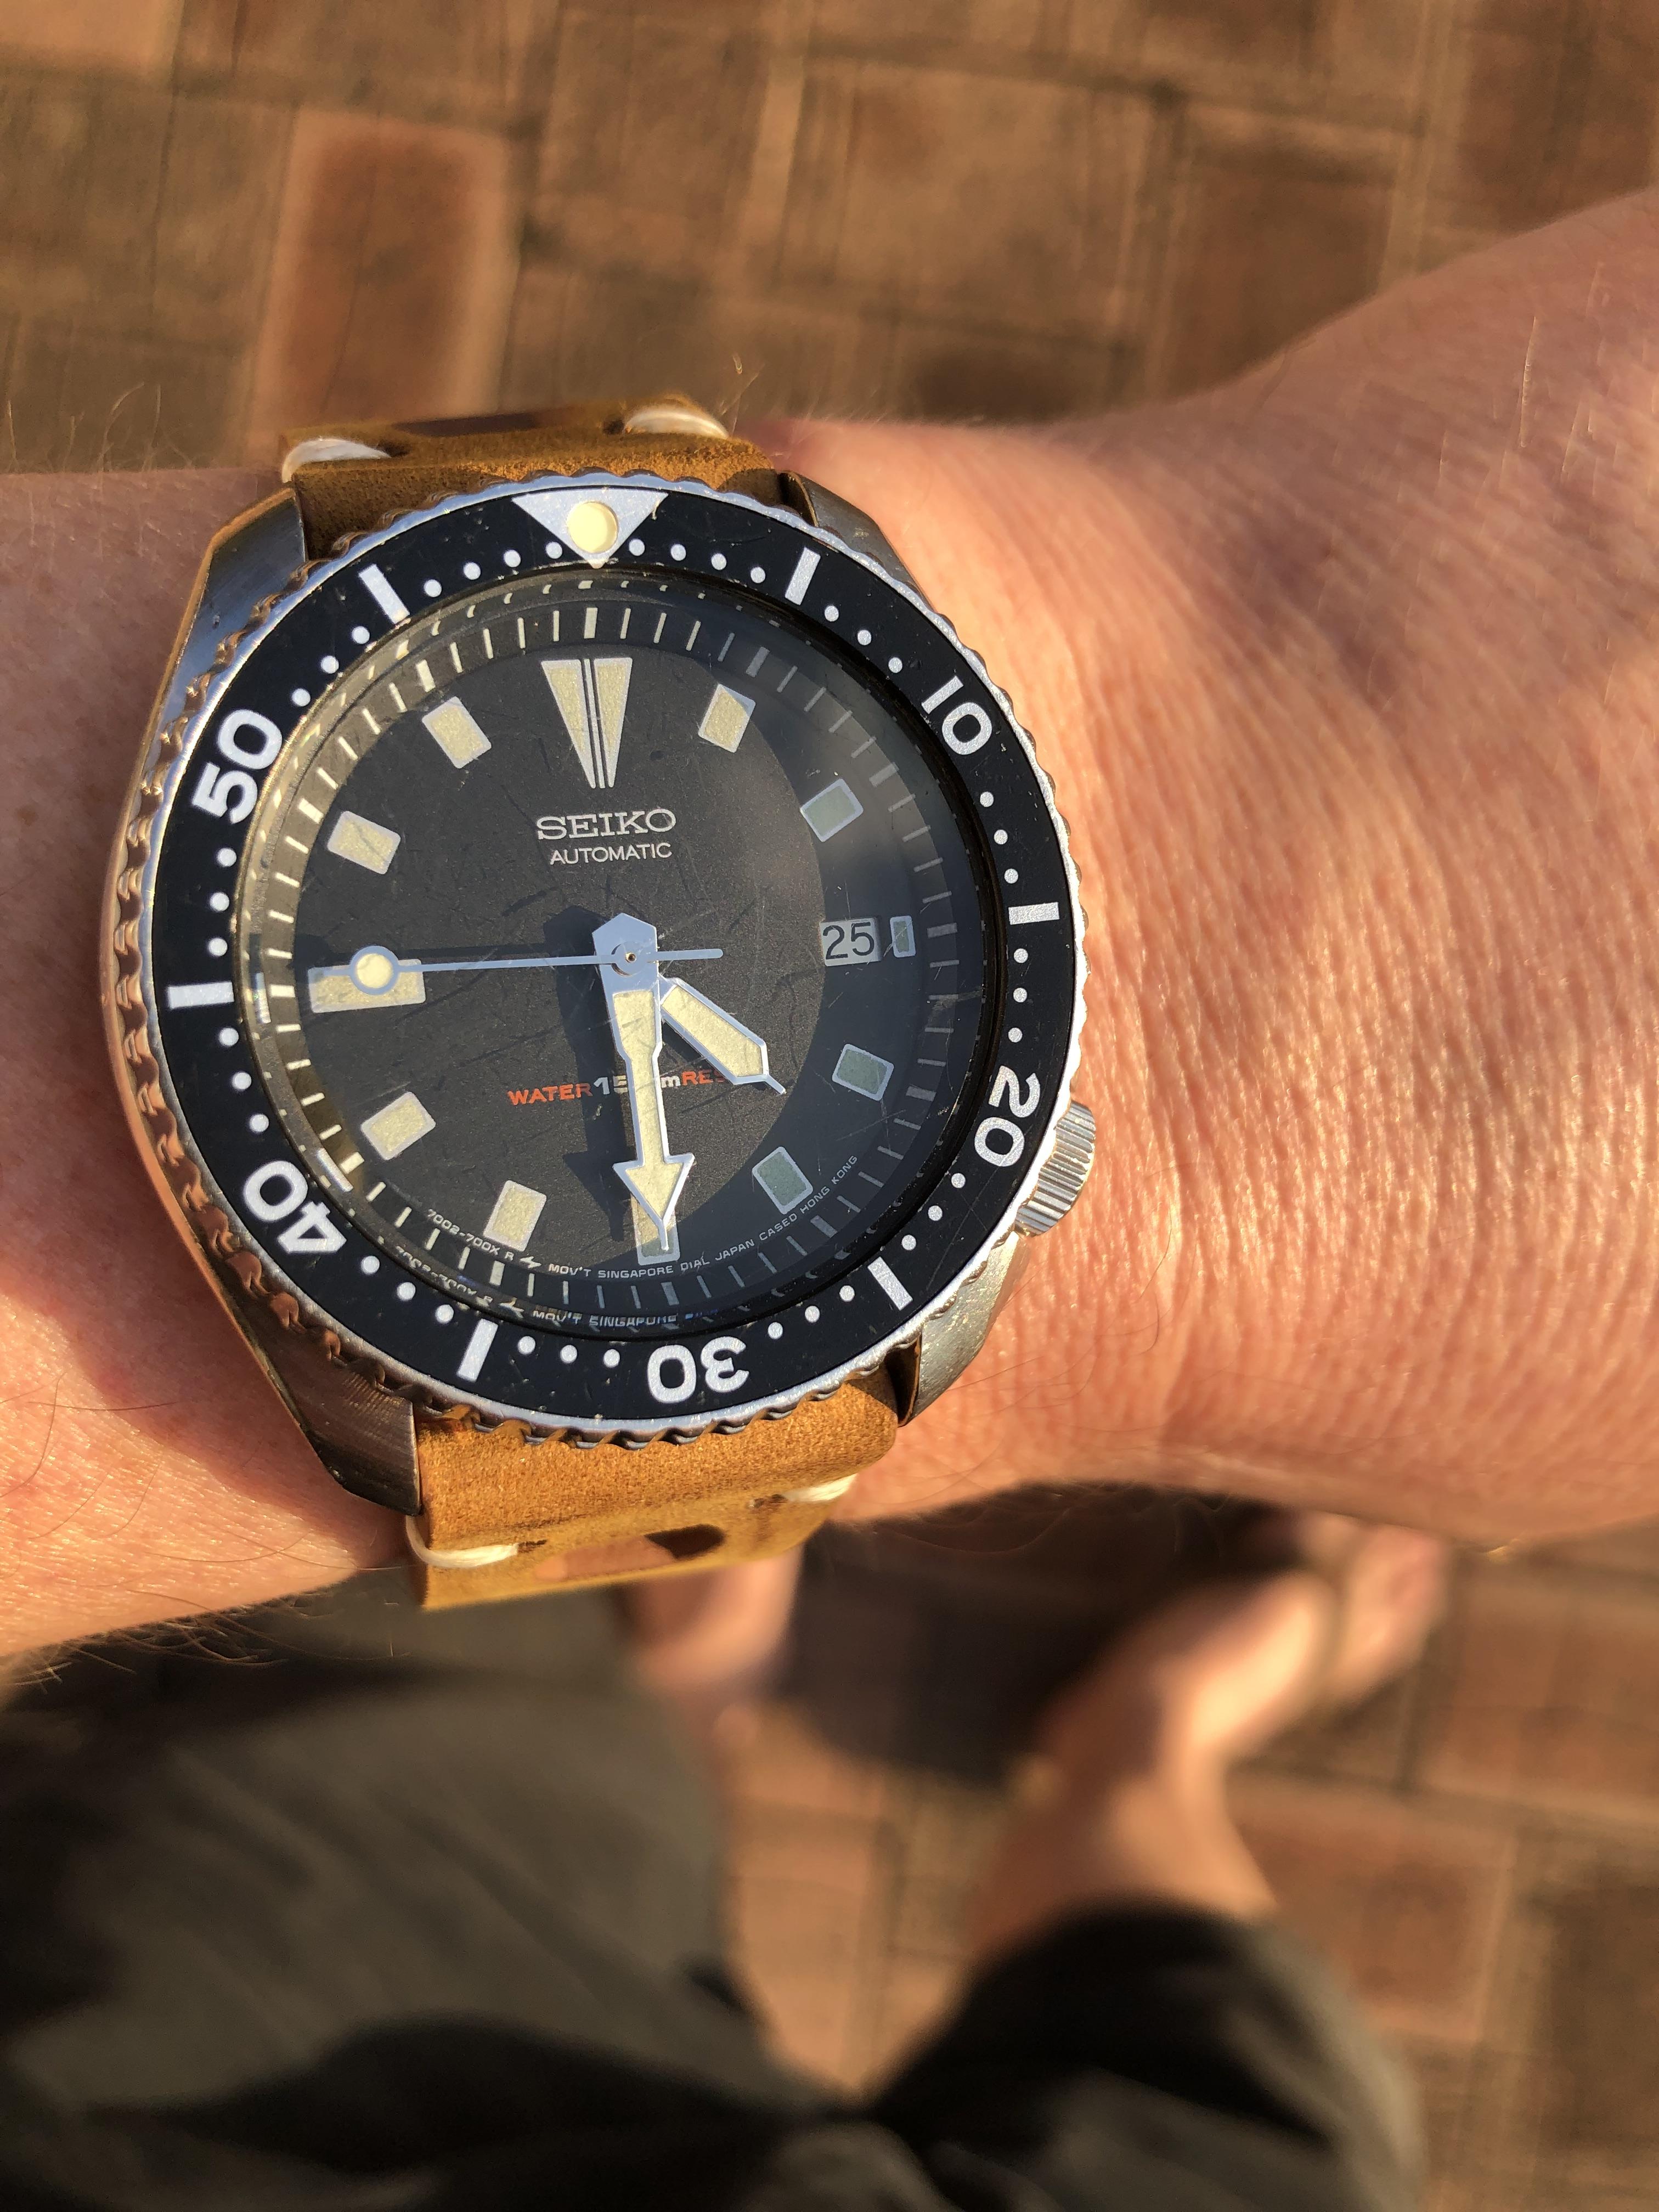 A Couple of 7002 Seiko Divers - Chat About Watches & The Industry Here -  Watch Repair Talk